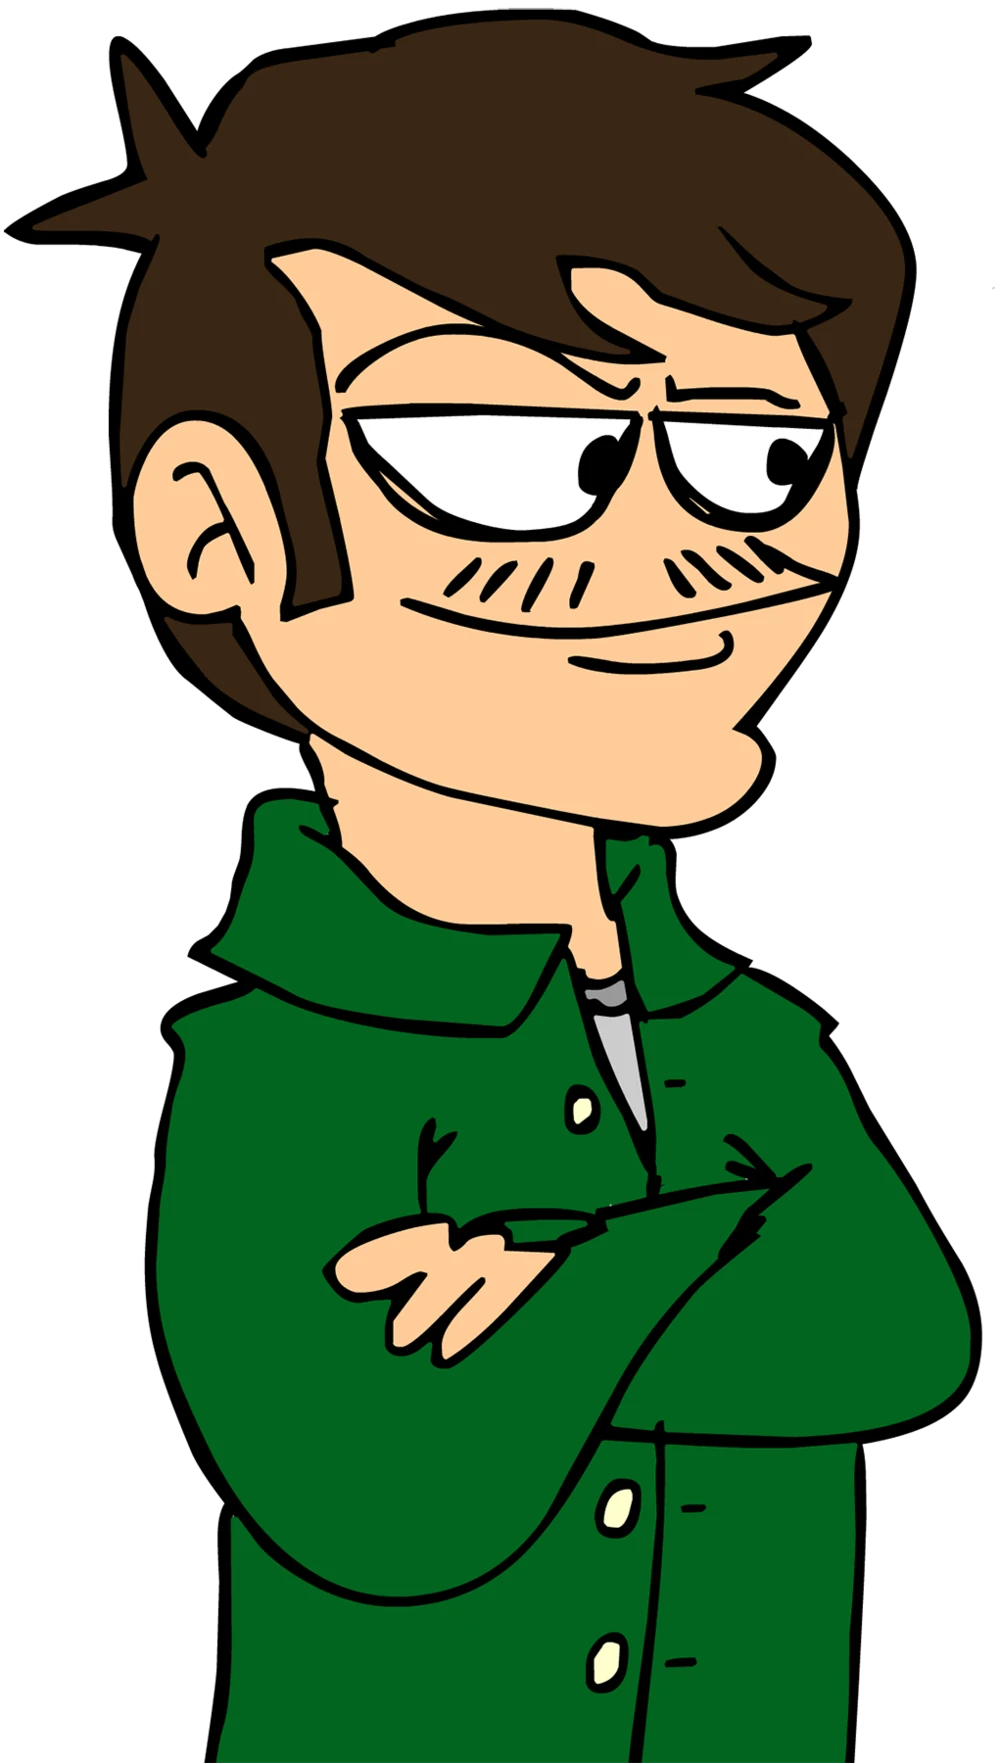 I'm doing this as some kind of series? I'm drawing every Eddsworld